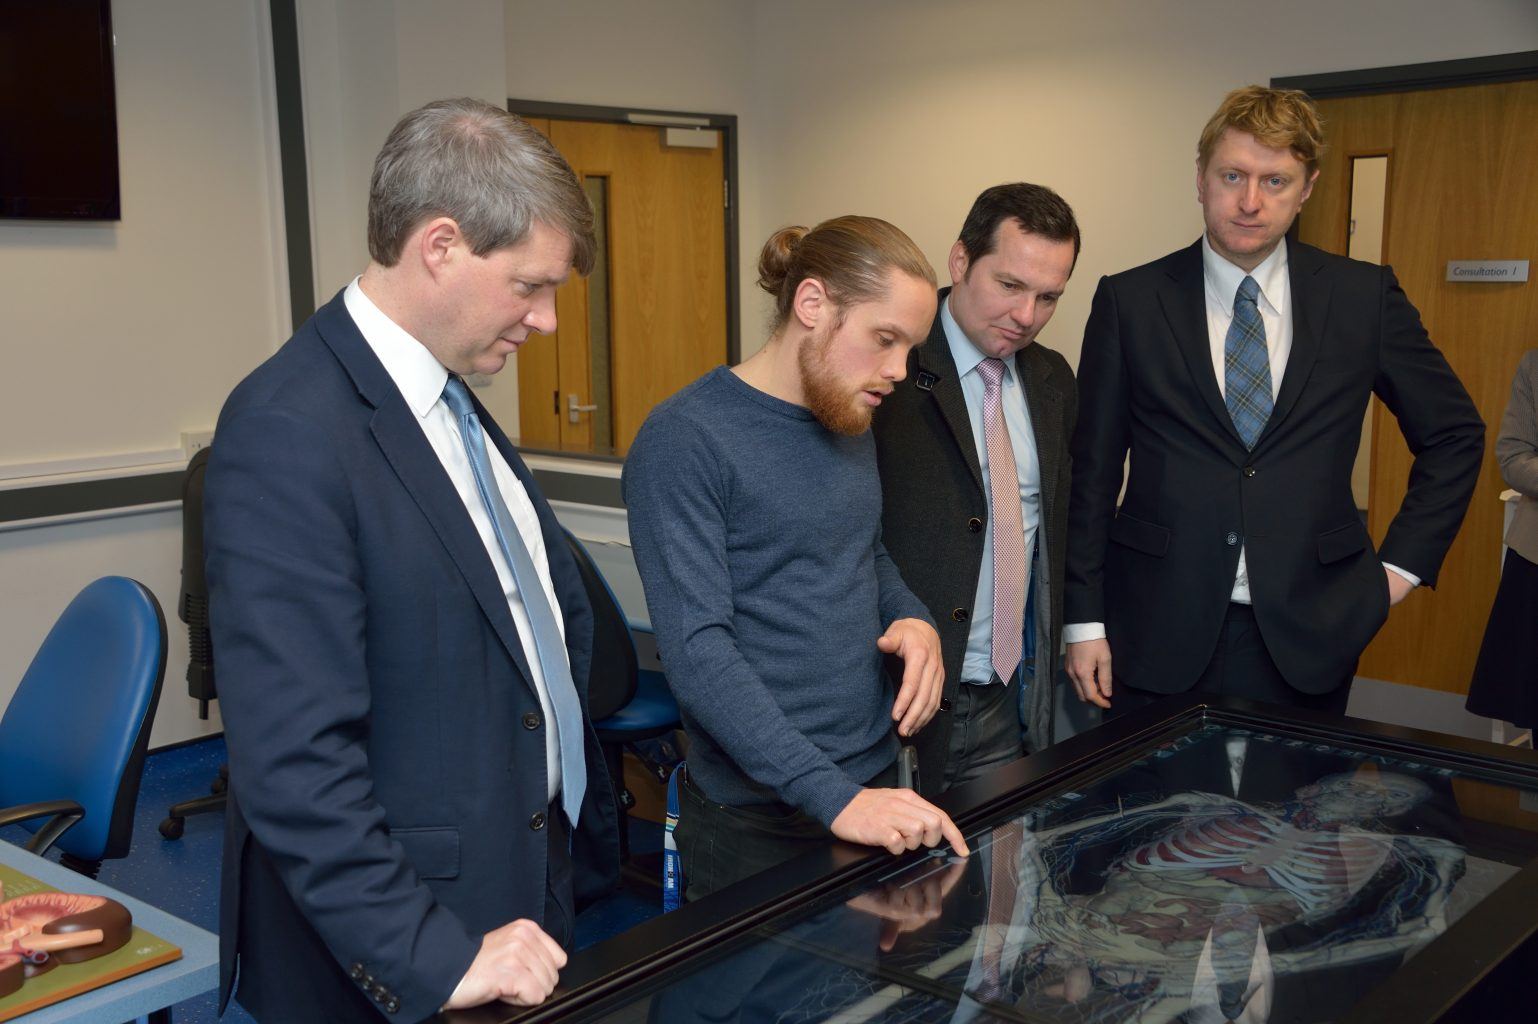 The Minister Of State For Universities, Science, Research & Innovation Visits The University of Bolton